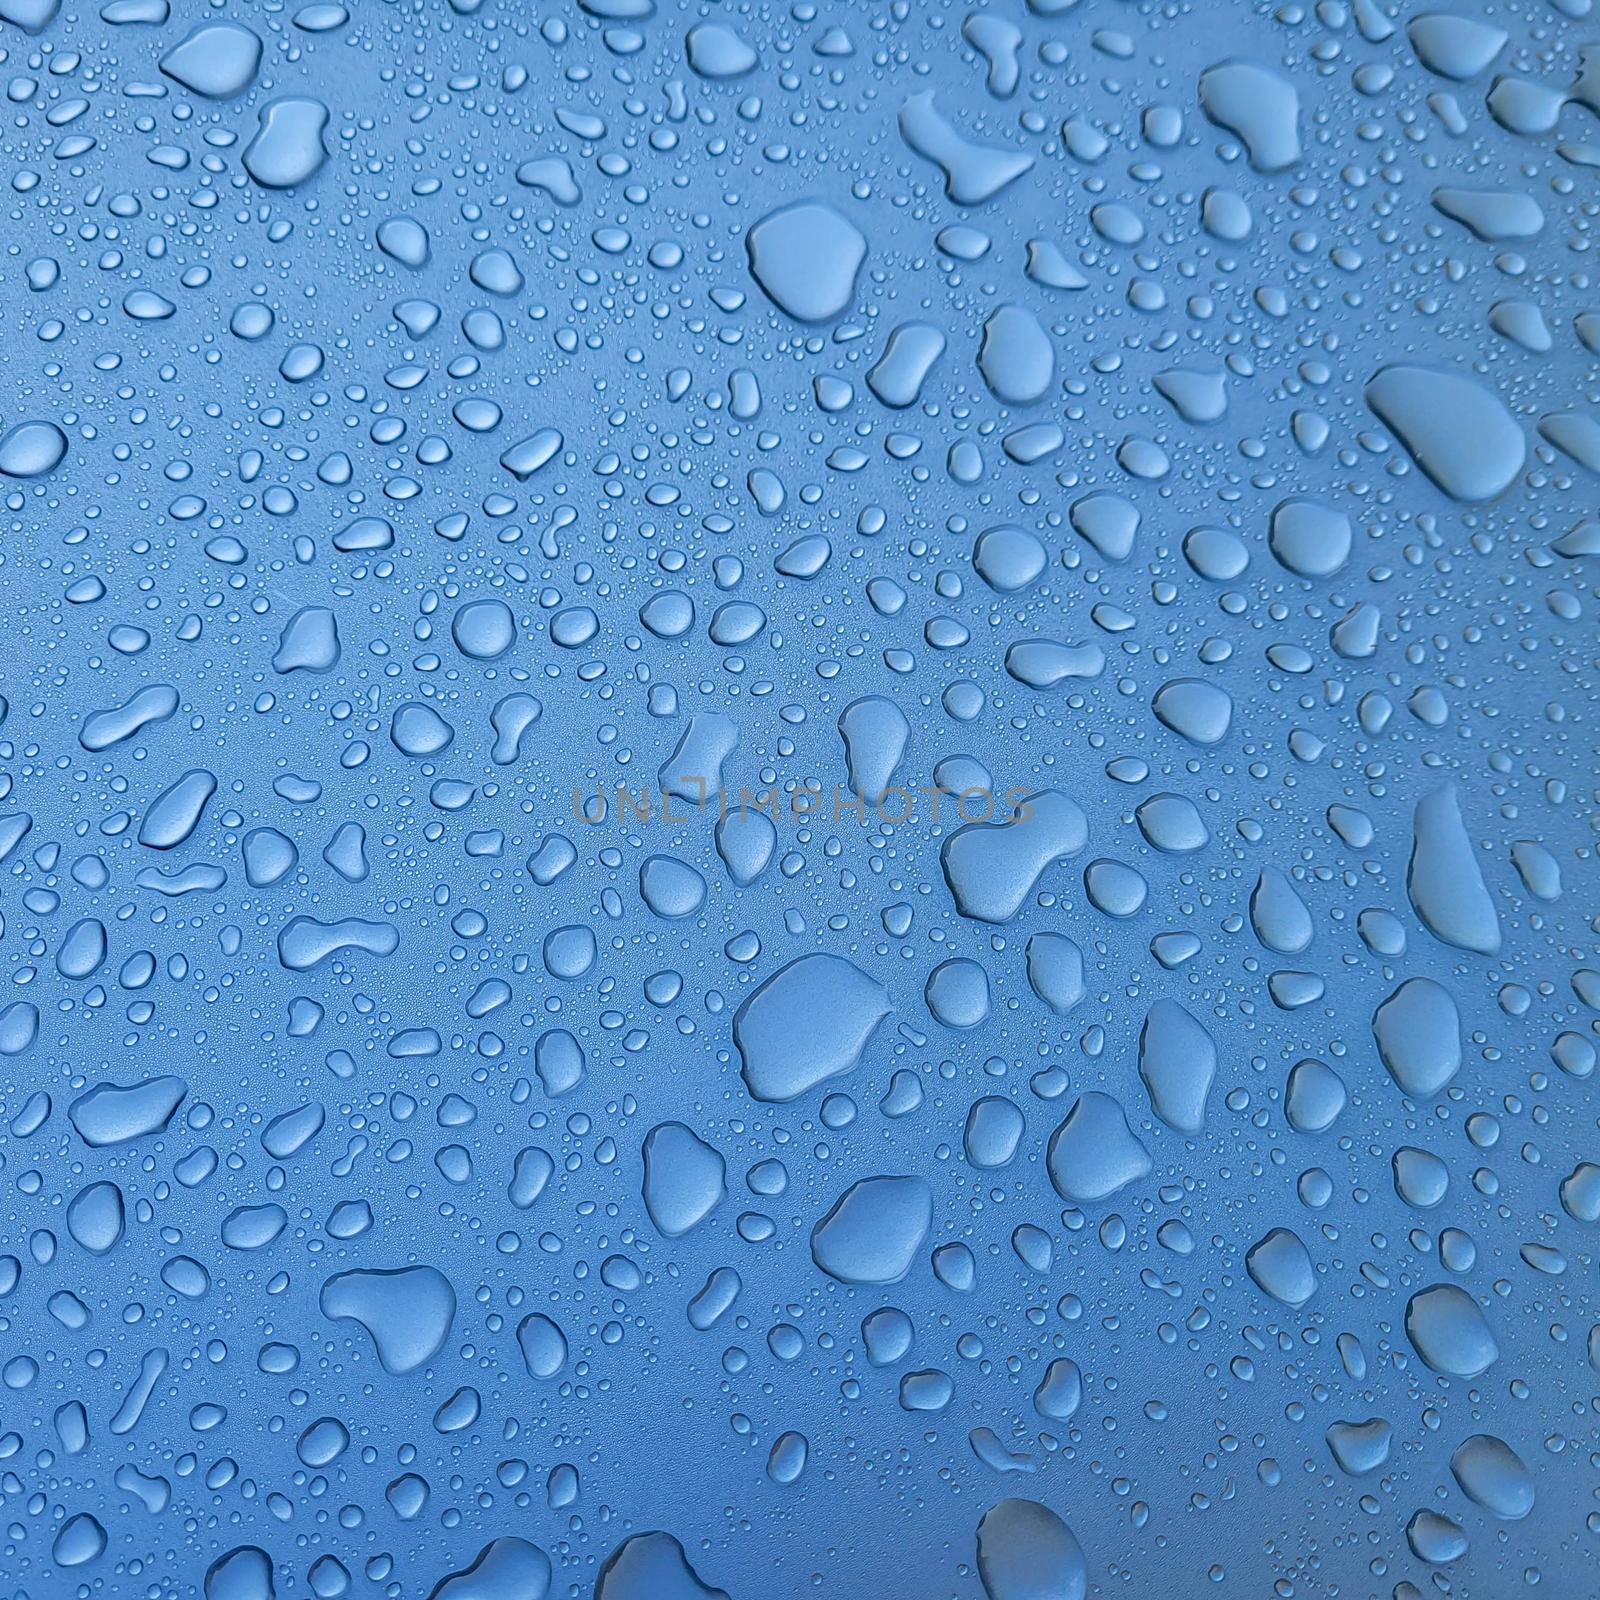 A drop of water on the hood of the car. Water beads after rain or car wash on blue paint surface. by lapushka62